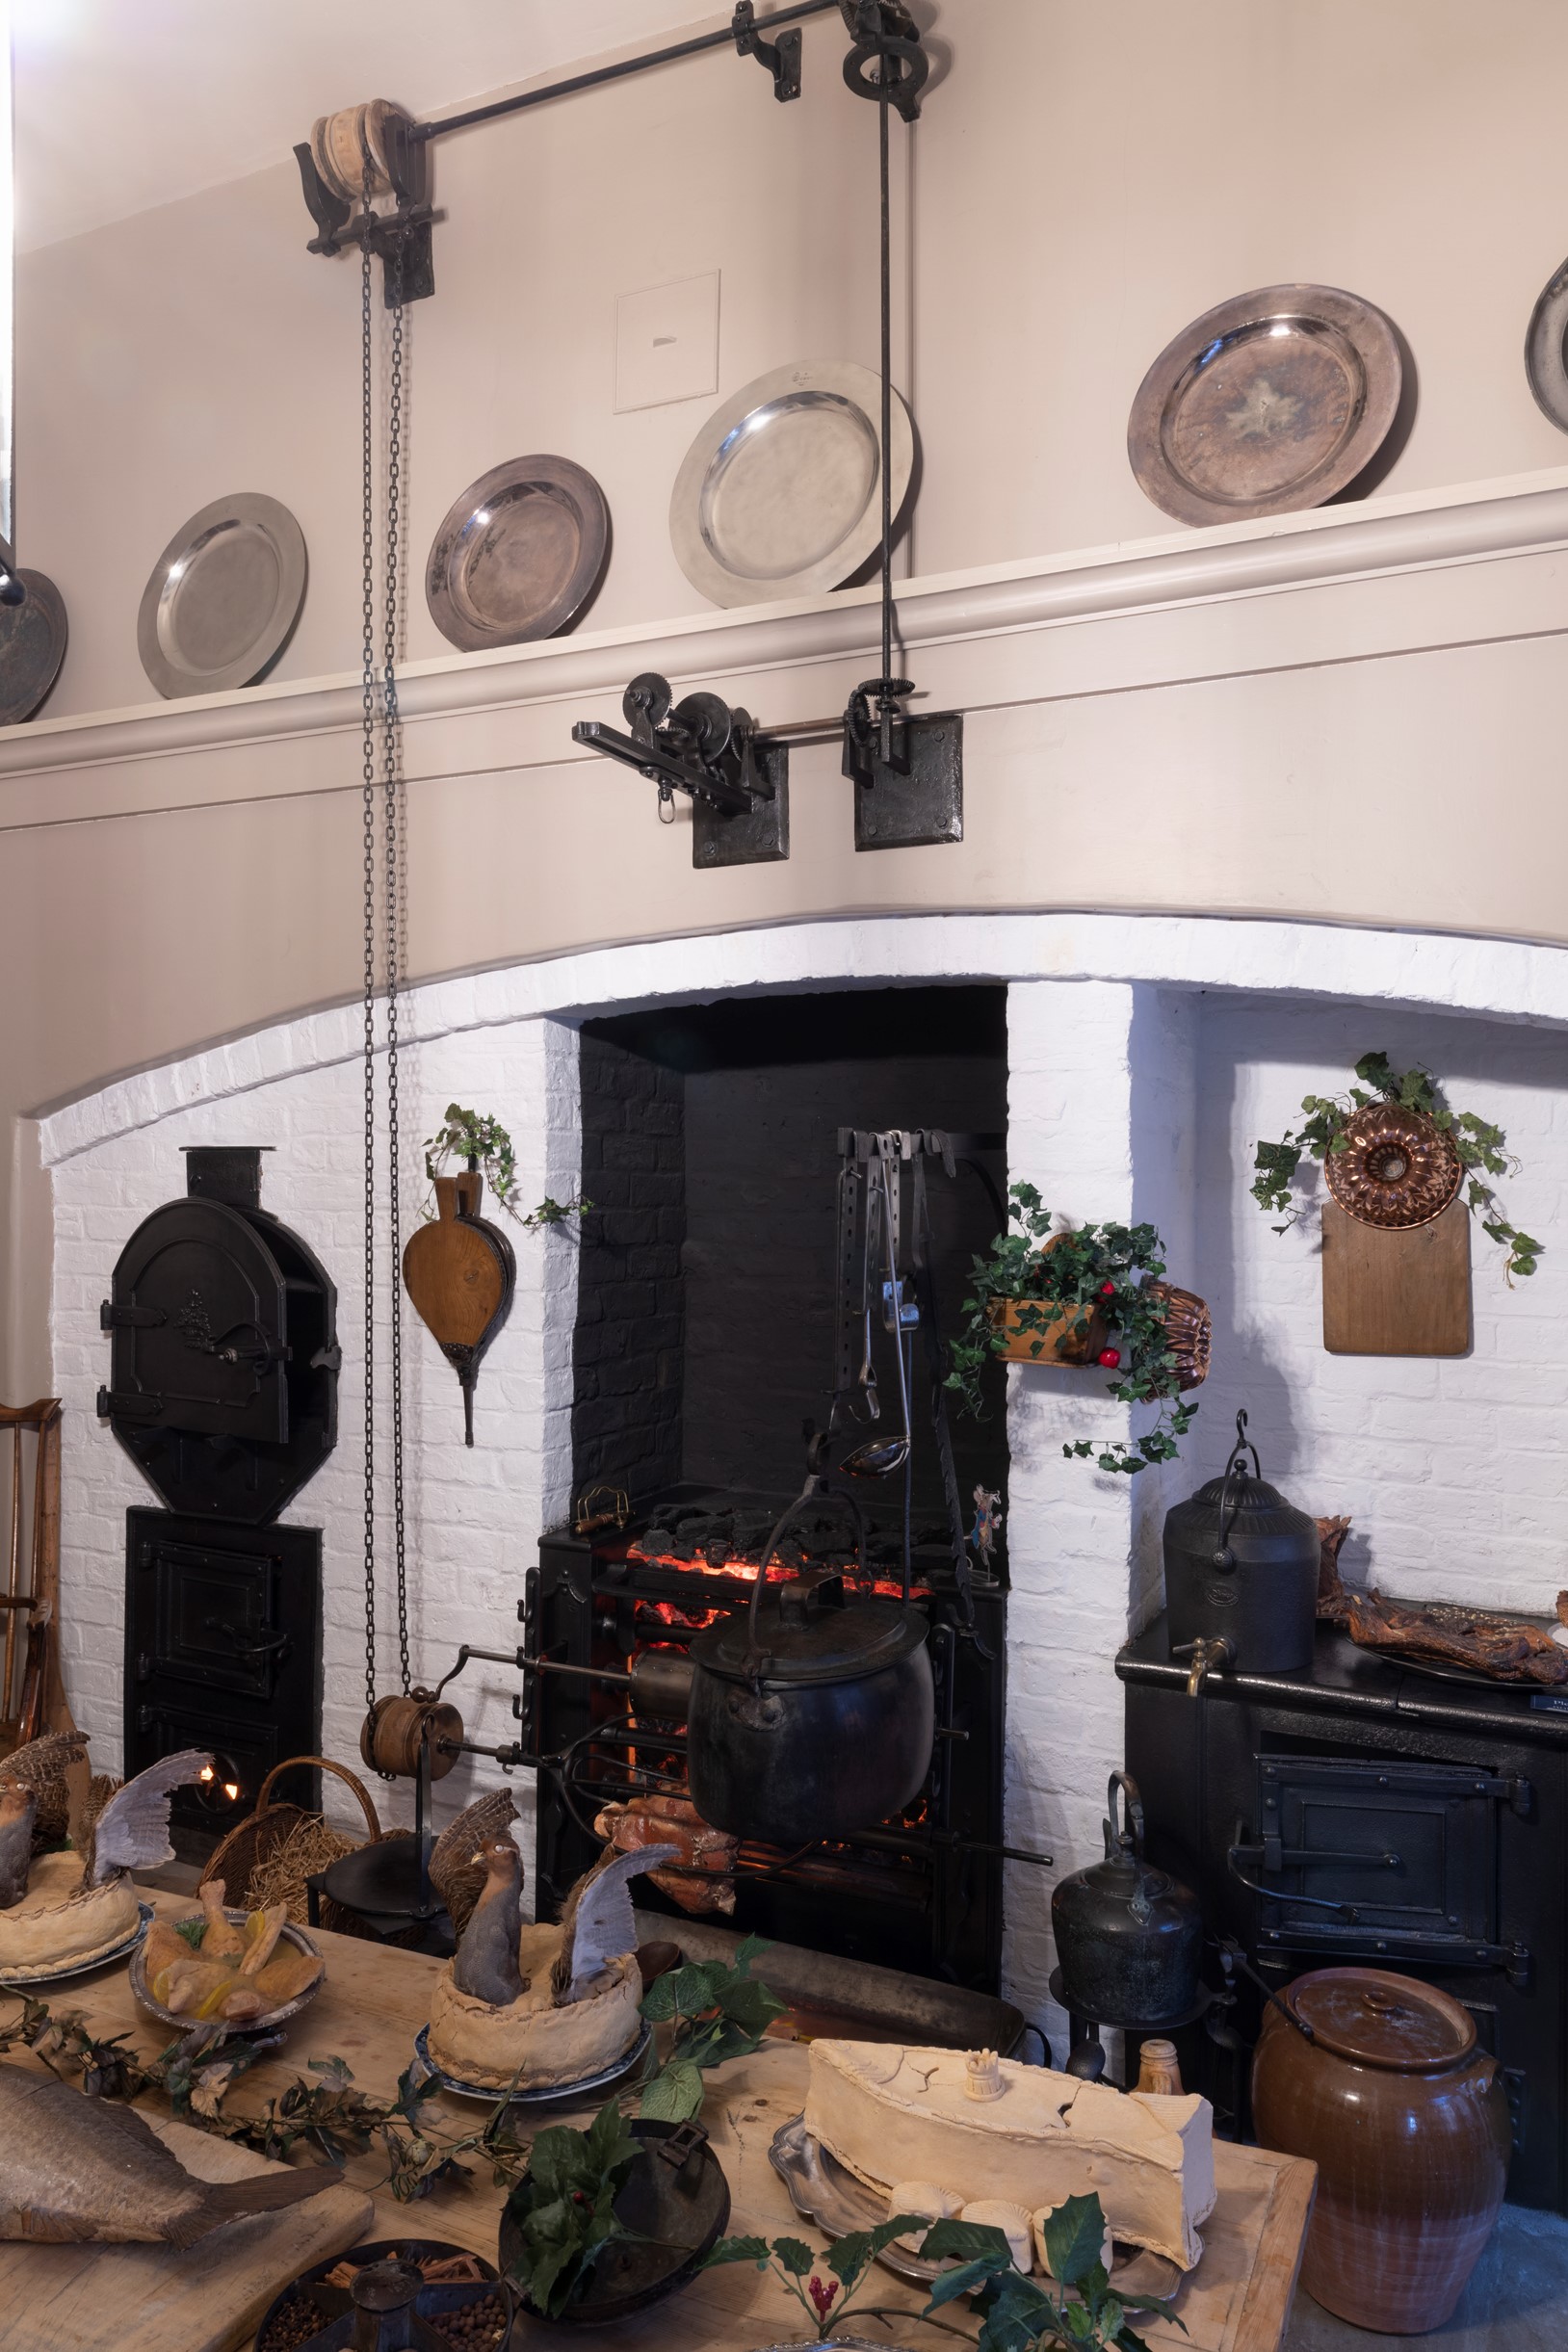 Fairfax House Georgian townhouse kitchen | York Conservation Trust | People and place